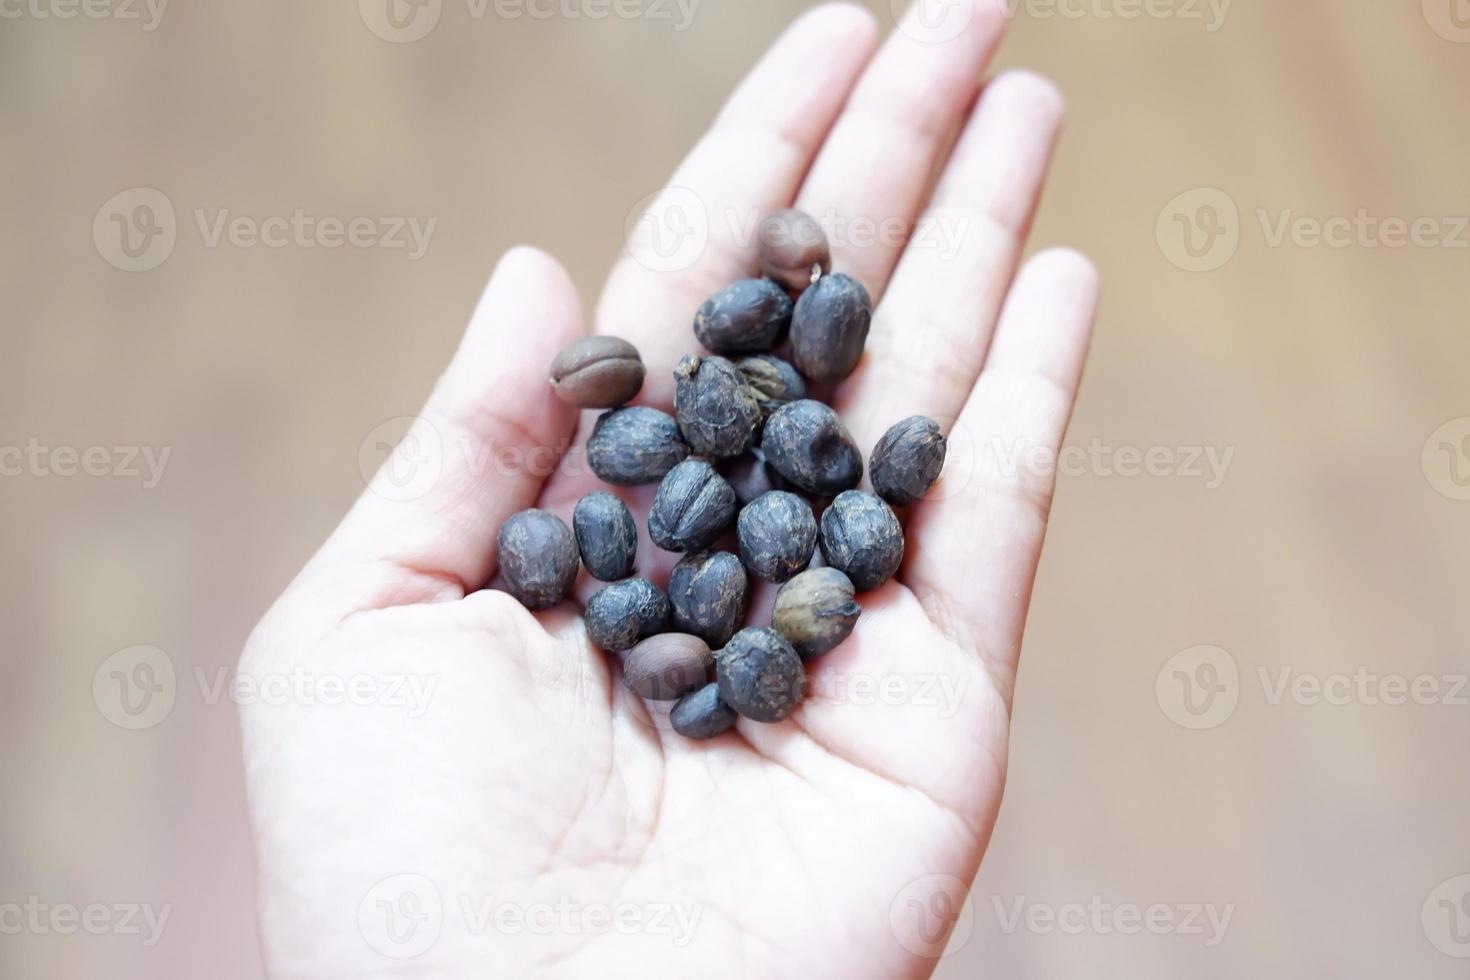 Roasted coffee beans as a background photo